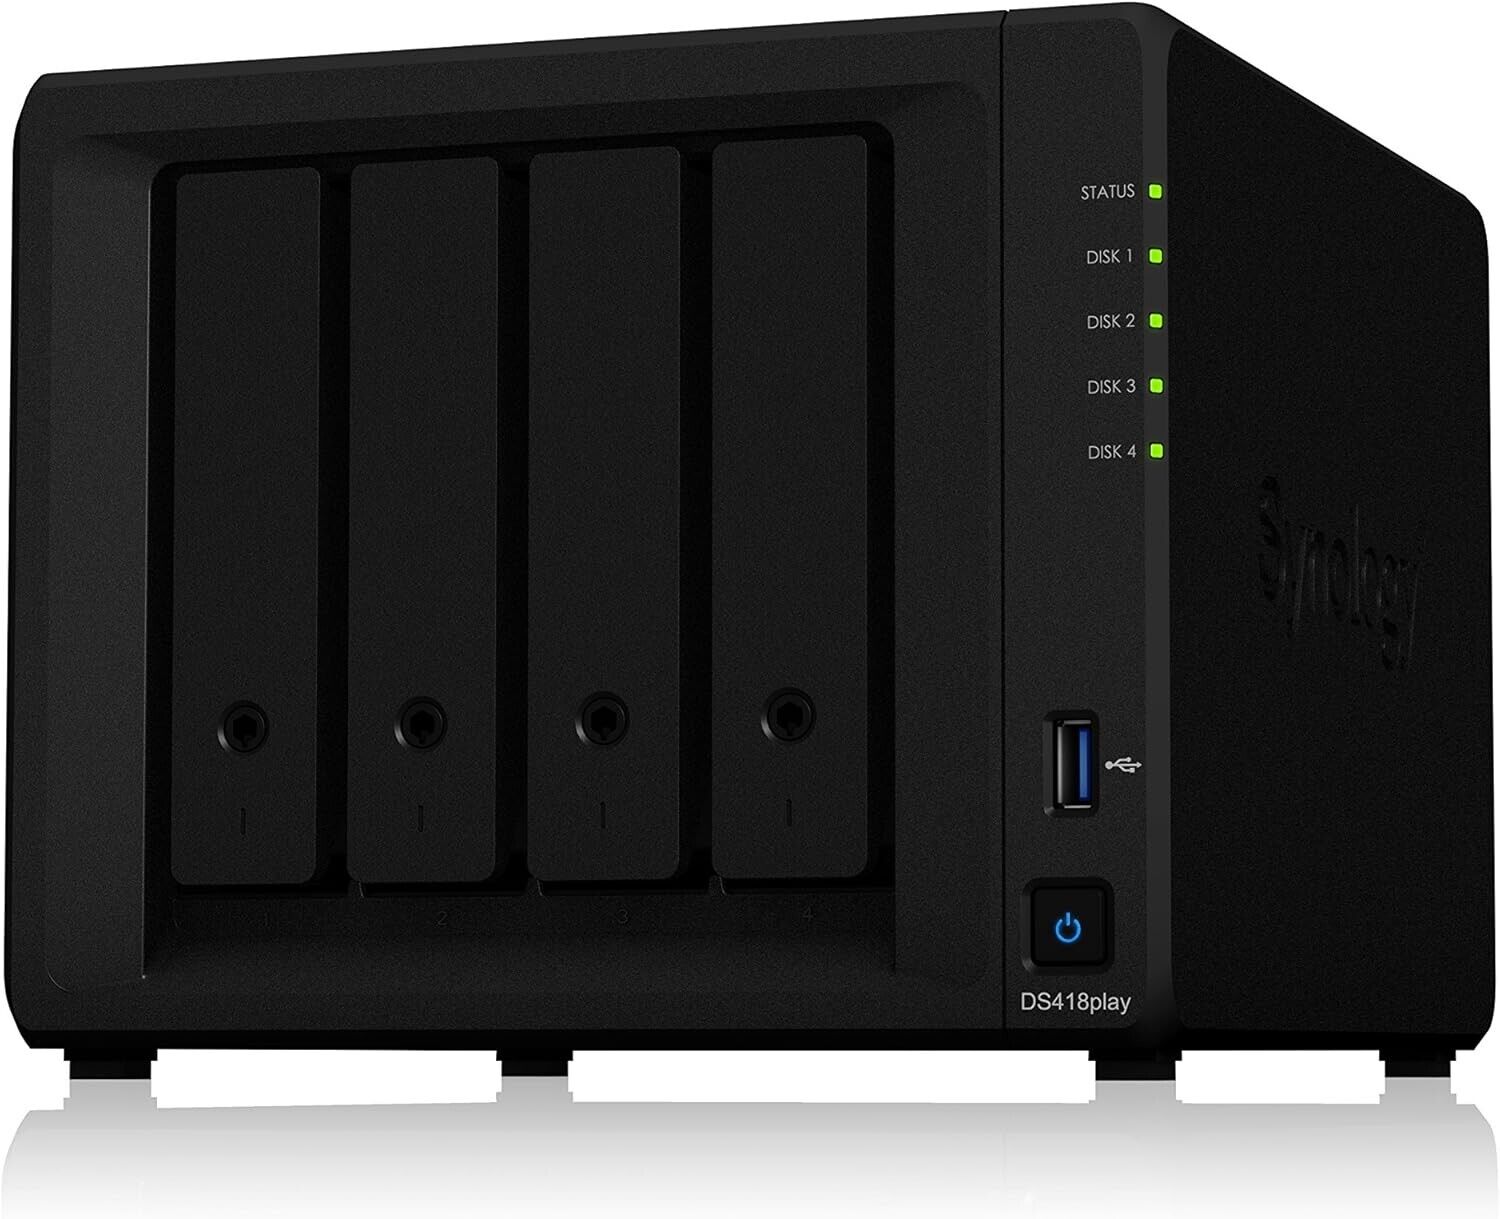 Synology DS418play NAS, 4-bay, 8GB DDR3L *MINT CONDITION*